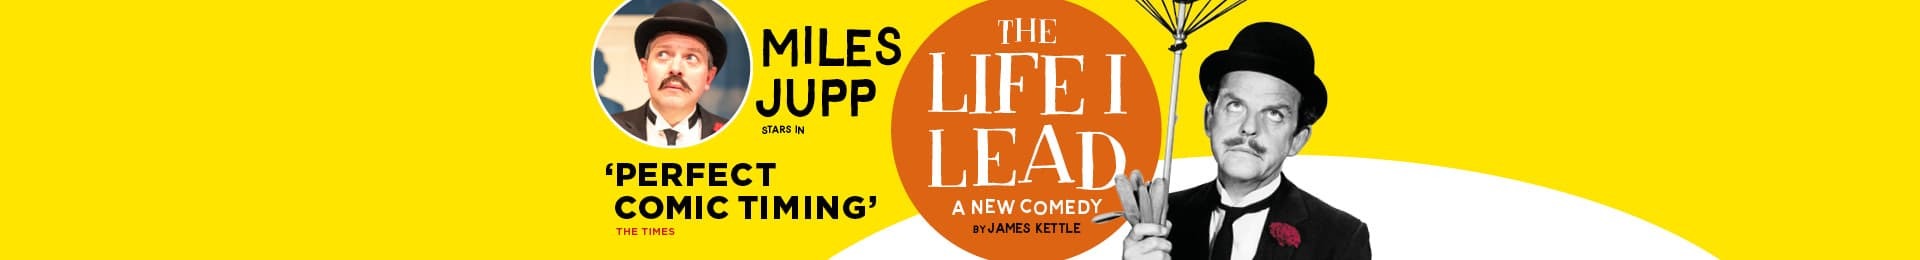 The Life I Lead banner image